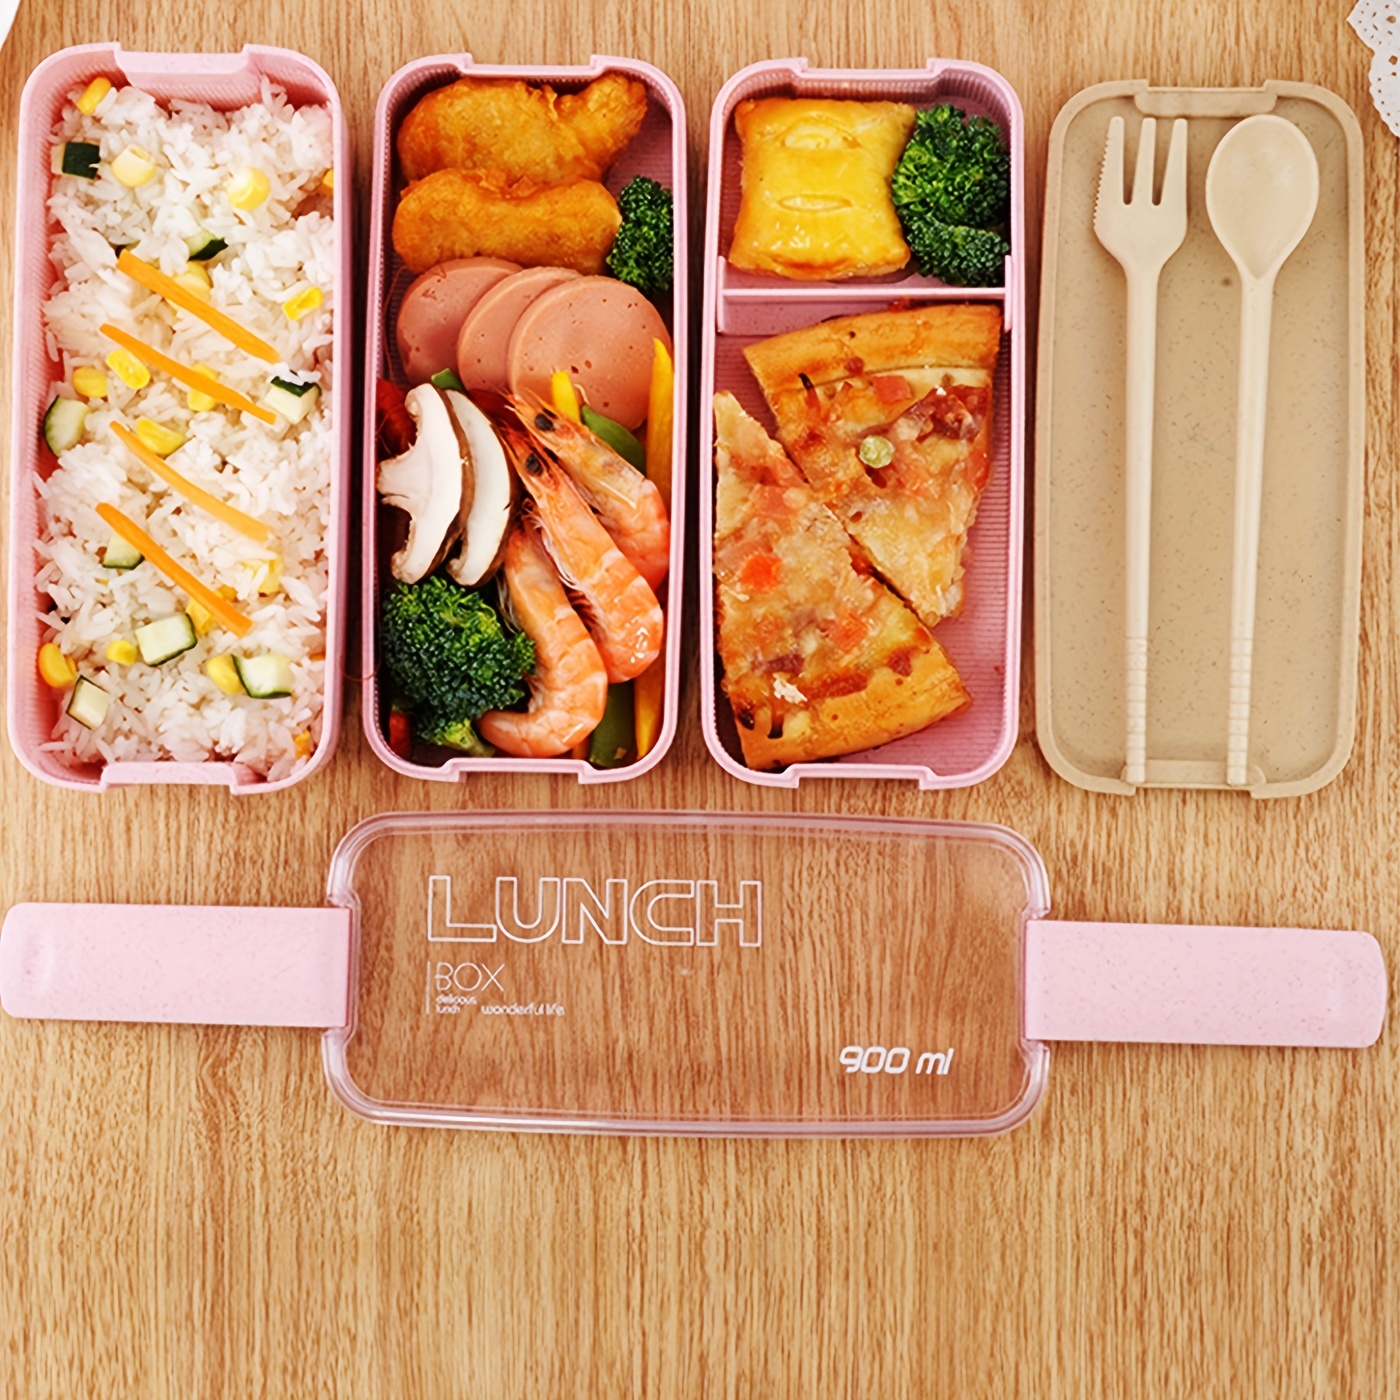 Bento Box Japanese Lunch Box Kit (11 PCS) 3-In-1 Compartment, Adults/Kids  (Green